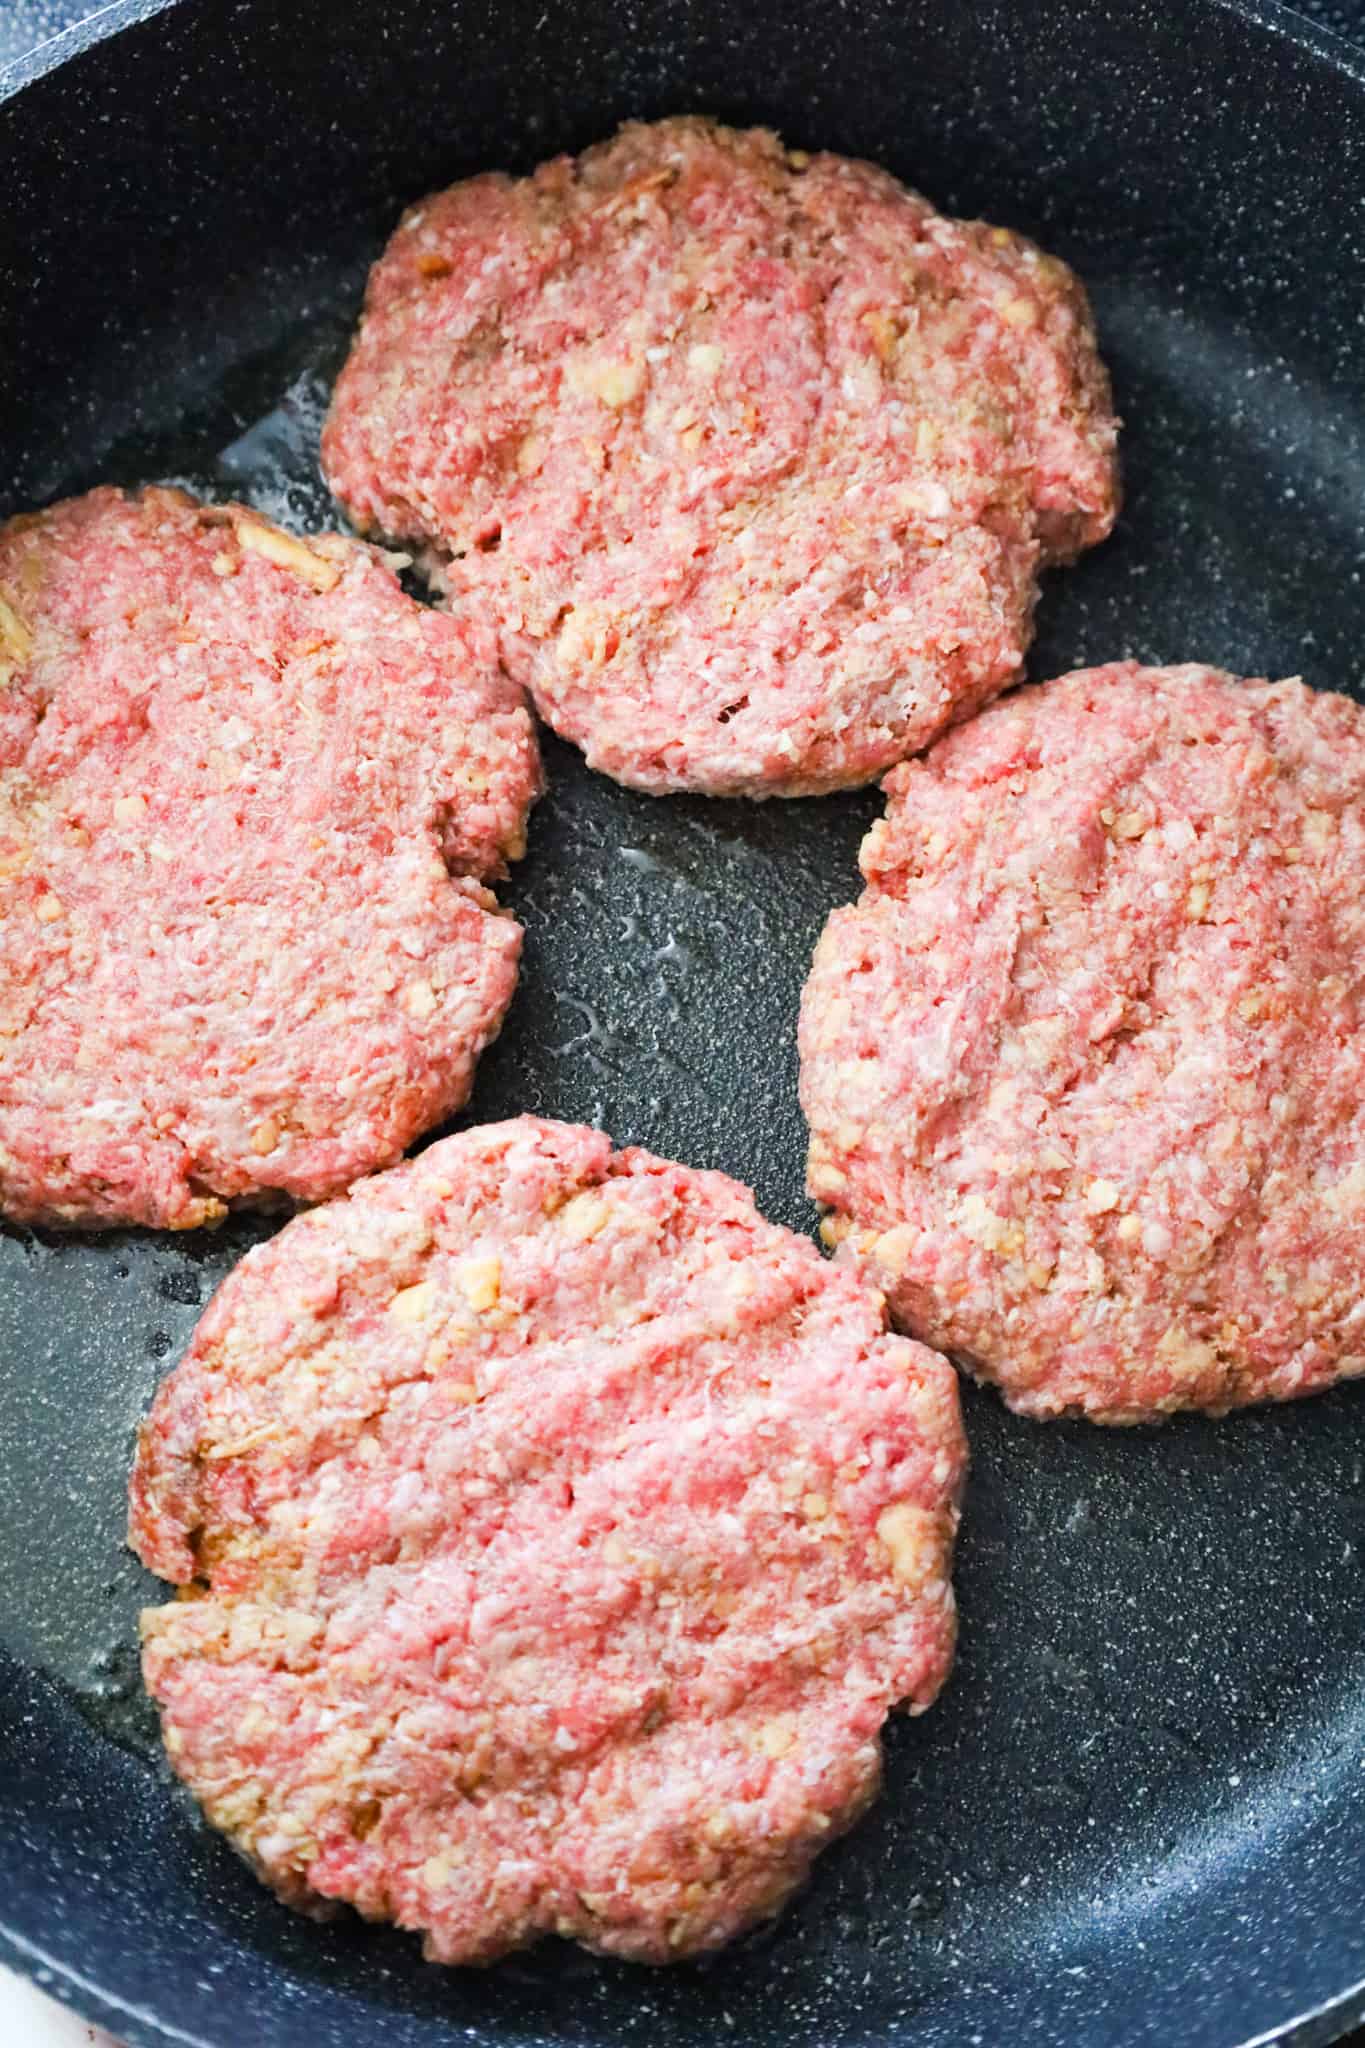 raw ground beef patties in a saute pan